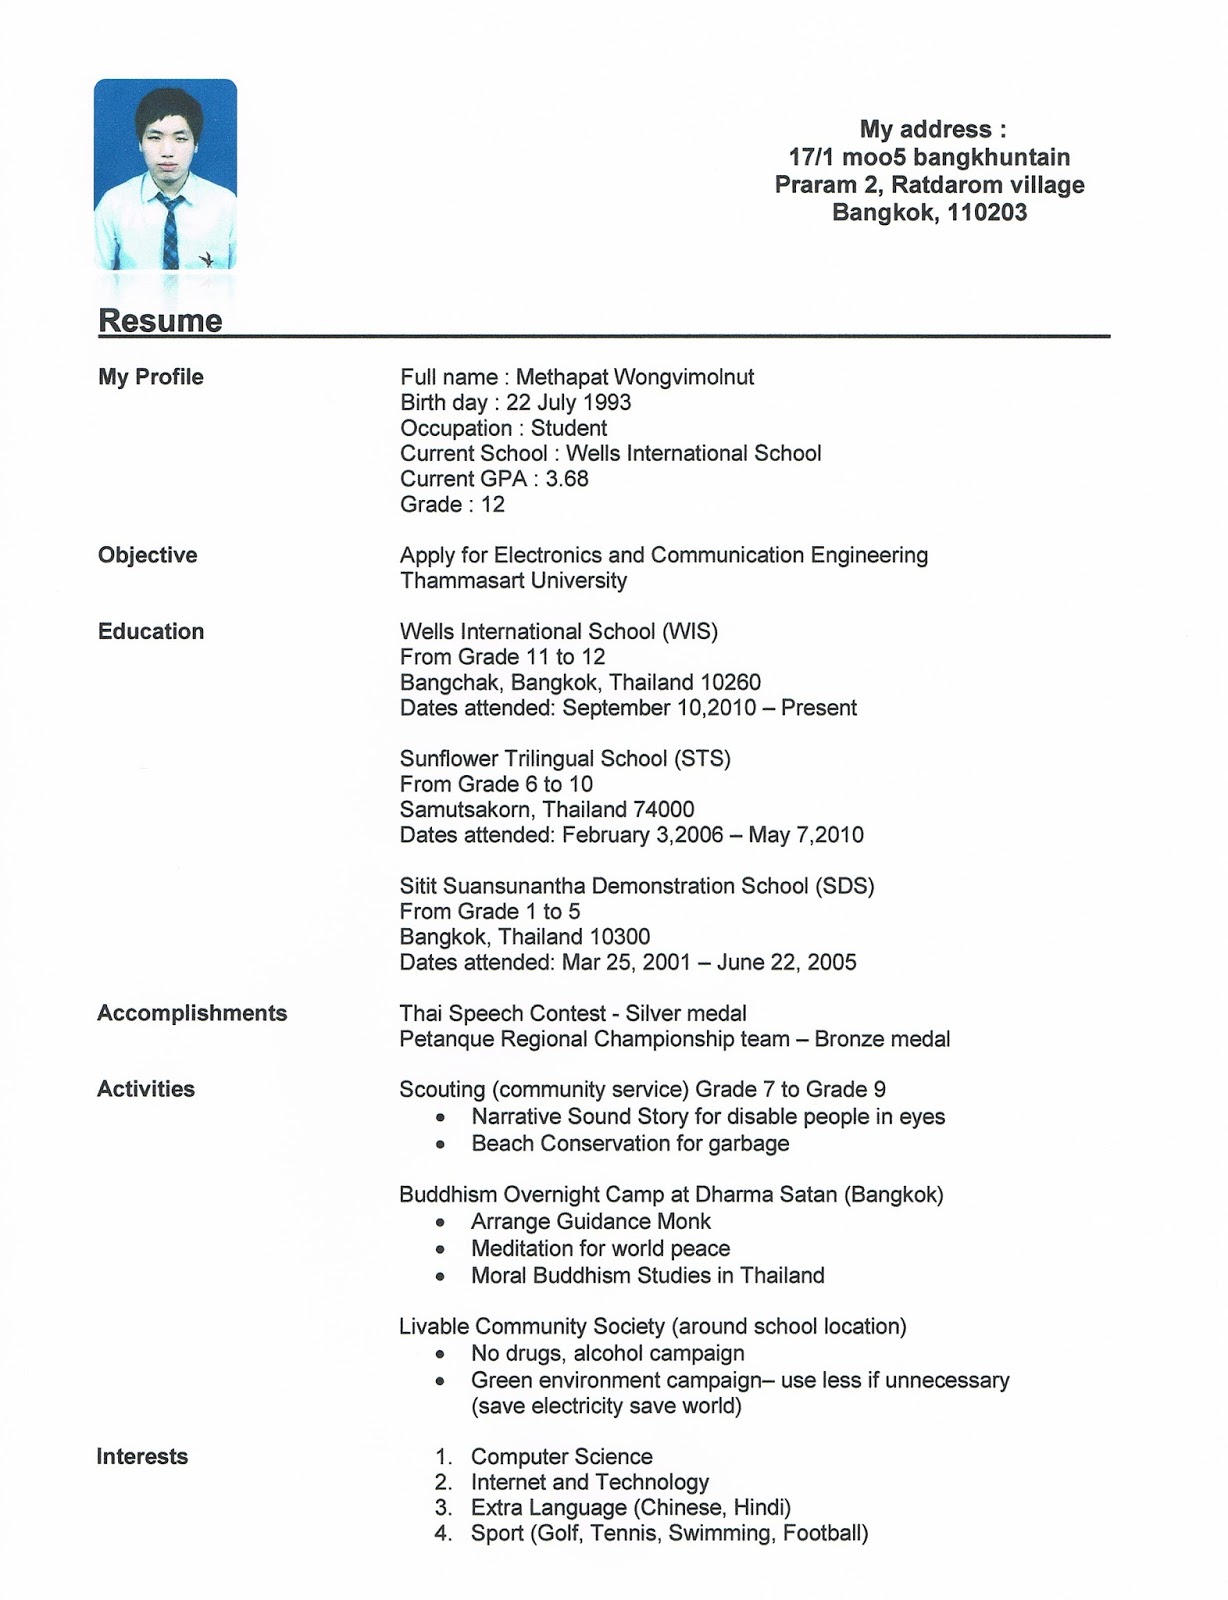 College on resume without degree